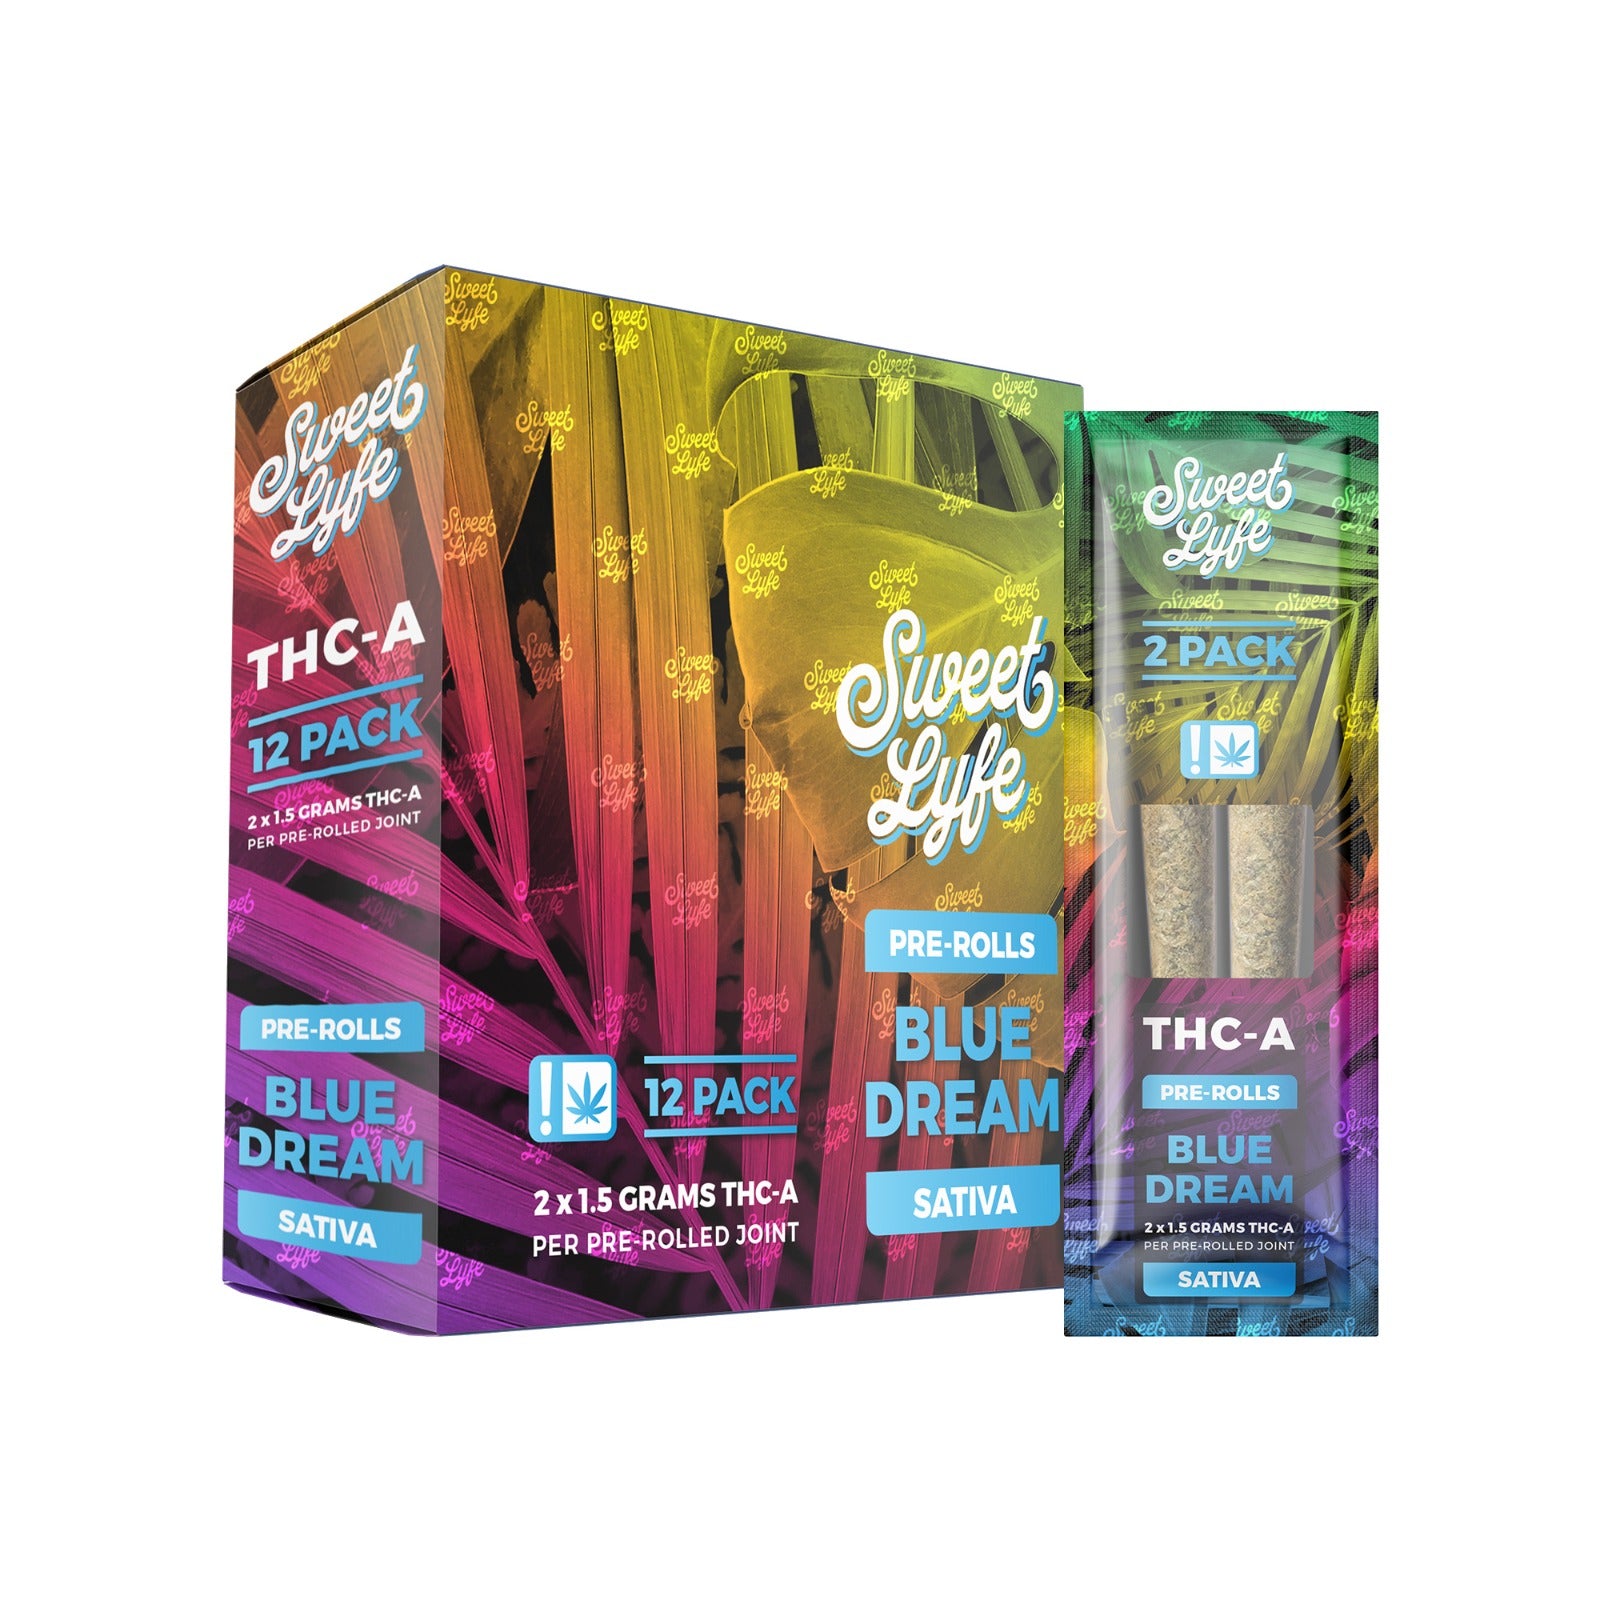 2 Pack Pre-Rolls Joint THC-A|Blue Dream - Sativa